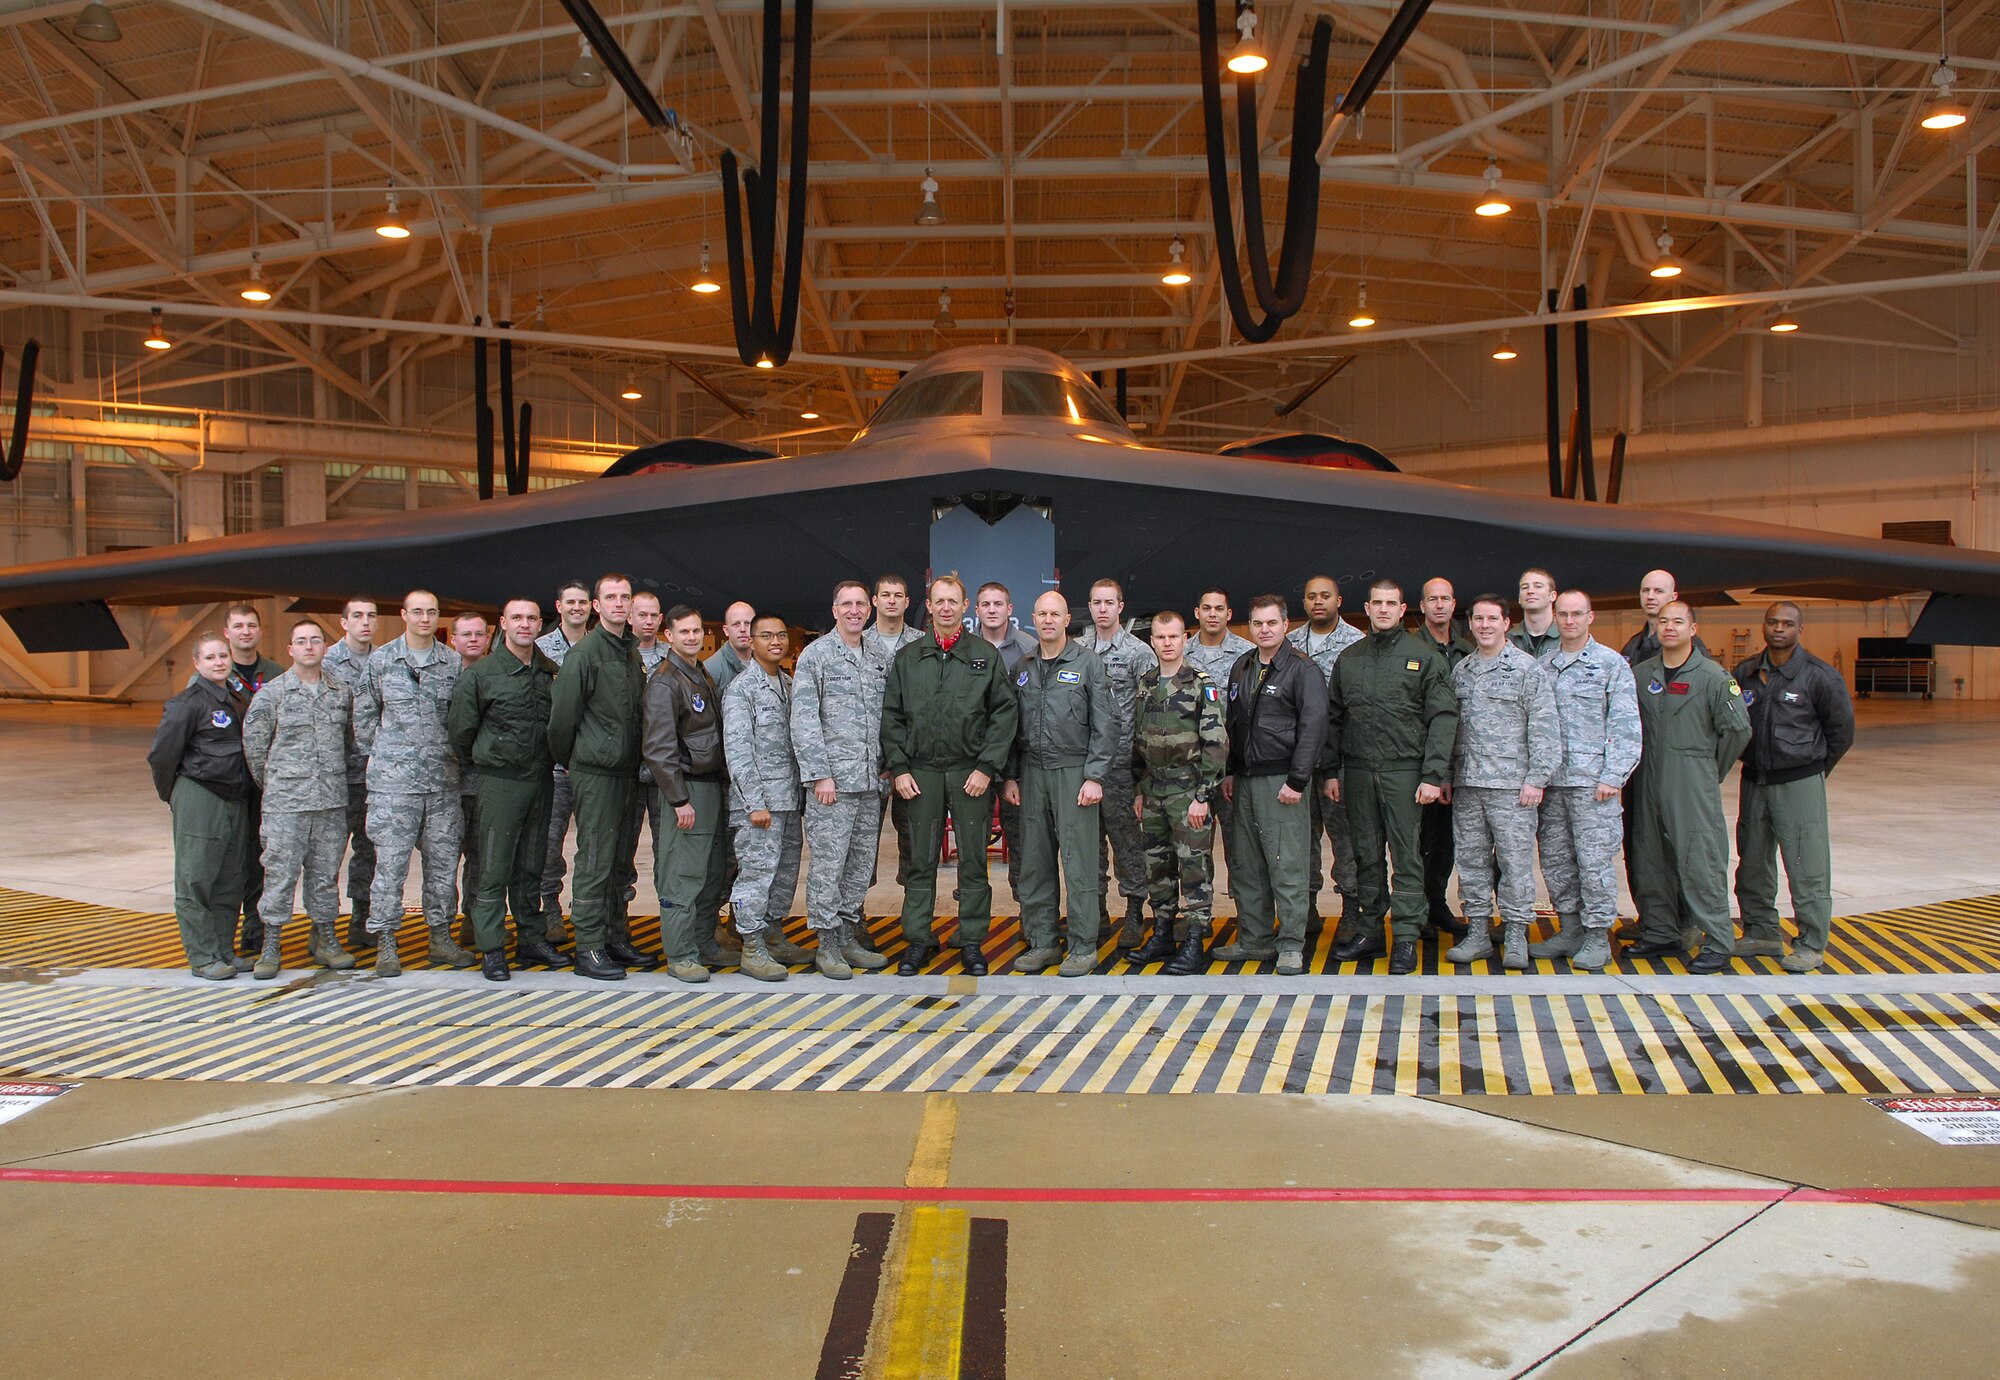 BARKSDALE AIR FORCE BASE, La. -- Lt. Gen. Paul Fouilland (center), French Strategic Air Forces commander-in-chief, and a delegation of French military officers pose in front of “The Spirit of Louisiana” B-2 bomber with Air Force Global Strike Command staff, and aircrew and maintenance personnel from the 509th Bomb Wing at Whiteman Air Force Base, Mo. The visit was part of a dialogue between the two nations’ strategic air forces, intended to build on commonalities and strengthen ties between the nations’ respective deterrence forces. (U.S. Air Force photo/Master Sgt. Corey A. Clements)